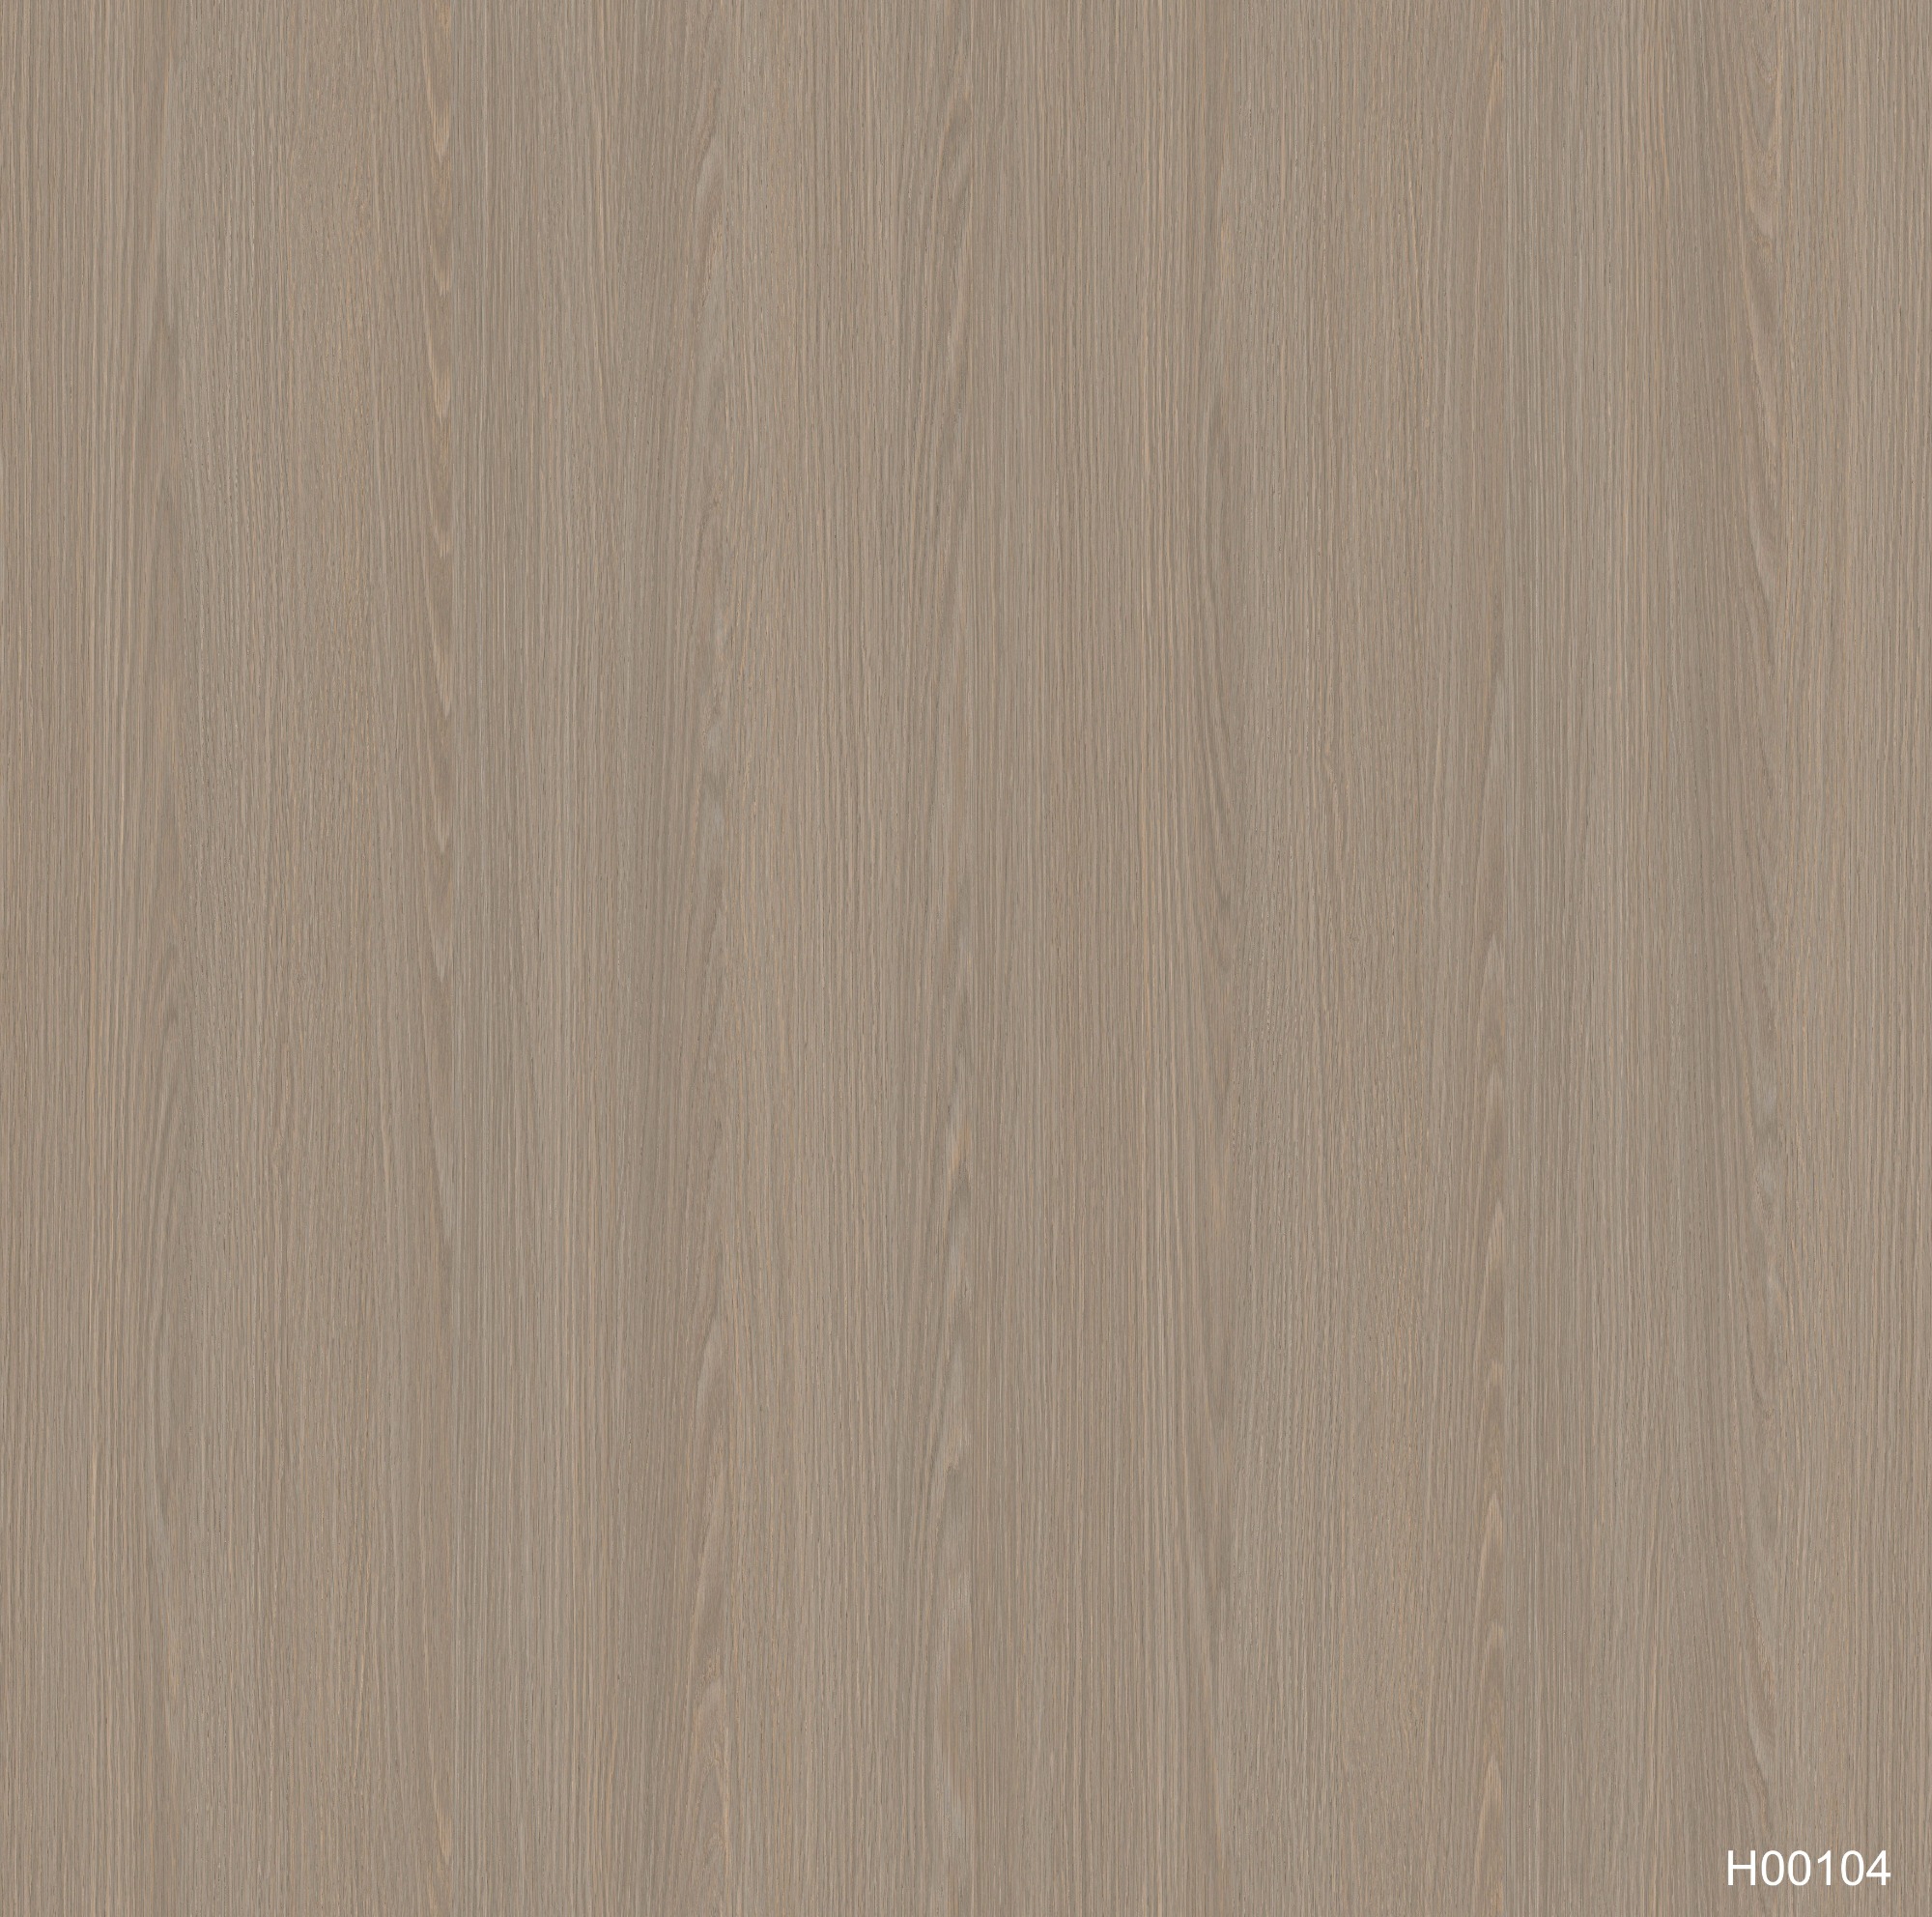 H00104 Melamine paper with wood grain